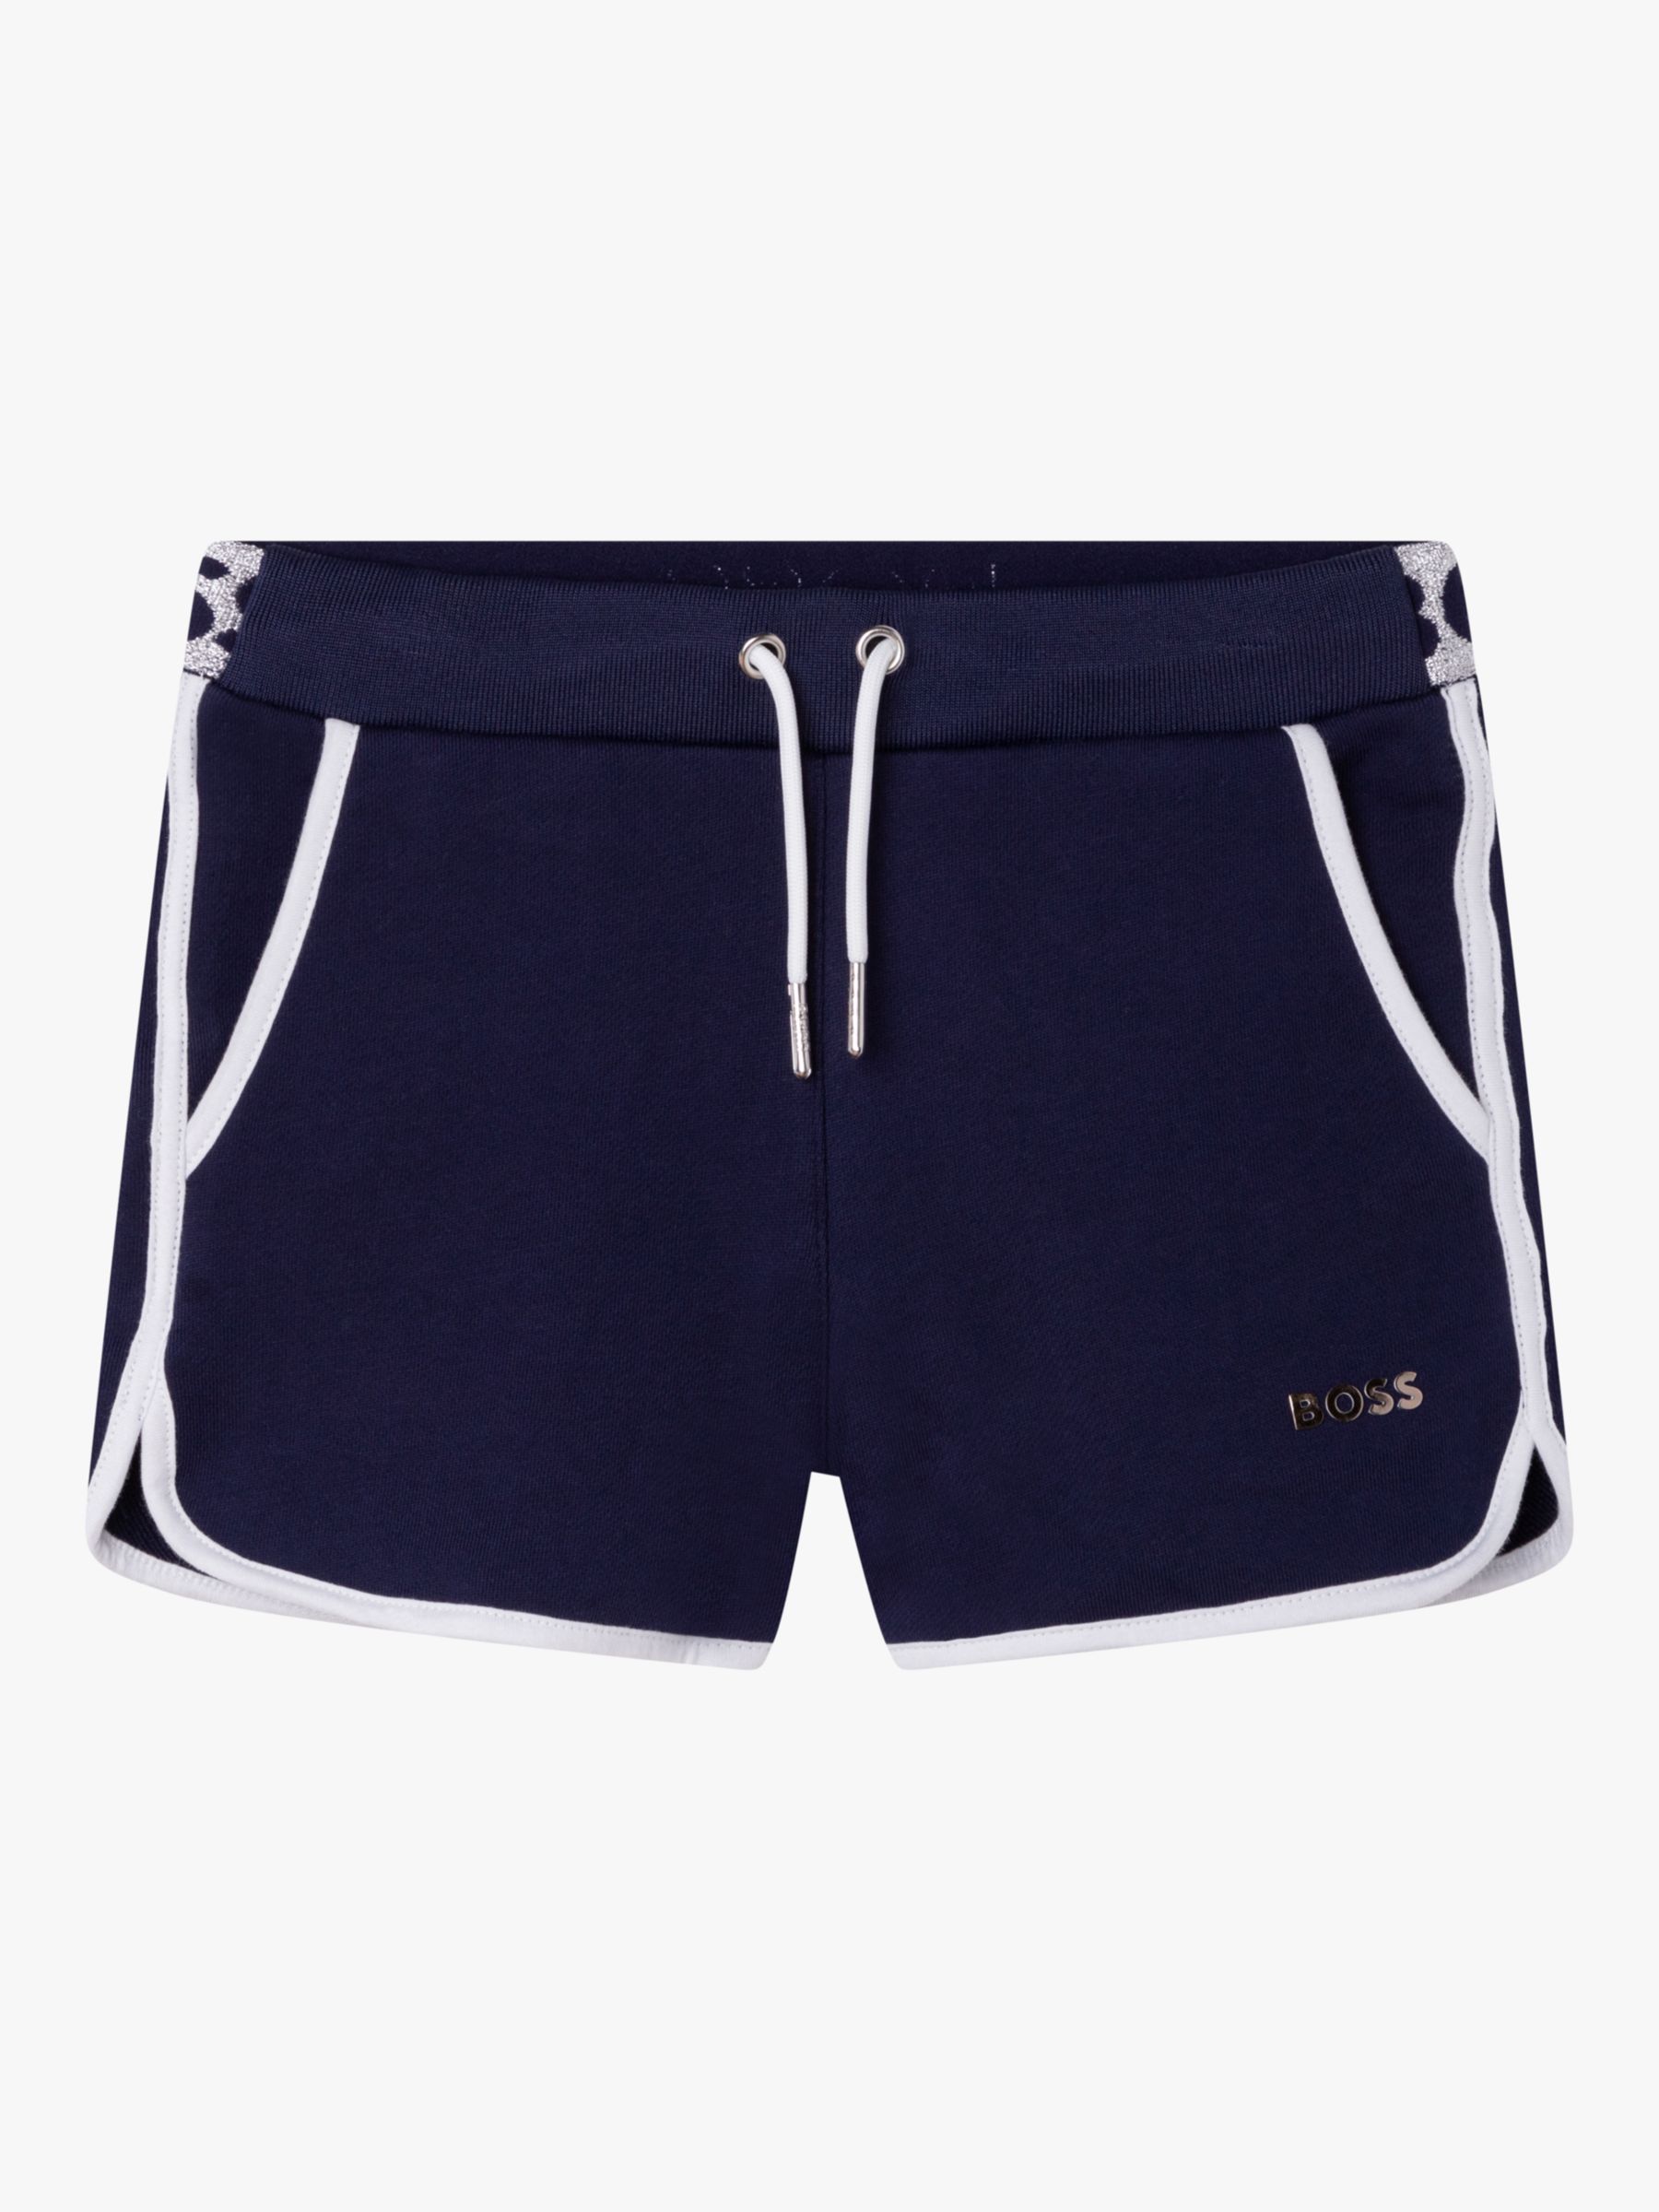 BOSS Kids' Contrast Trim Shorts, Nocturne, 4 years